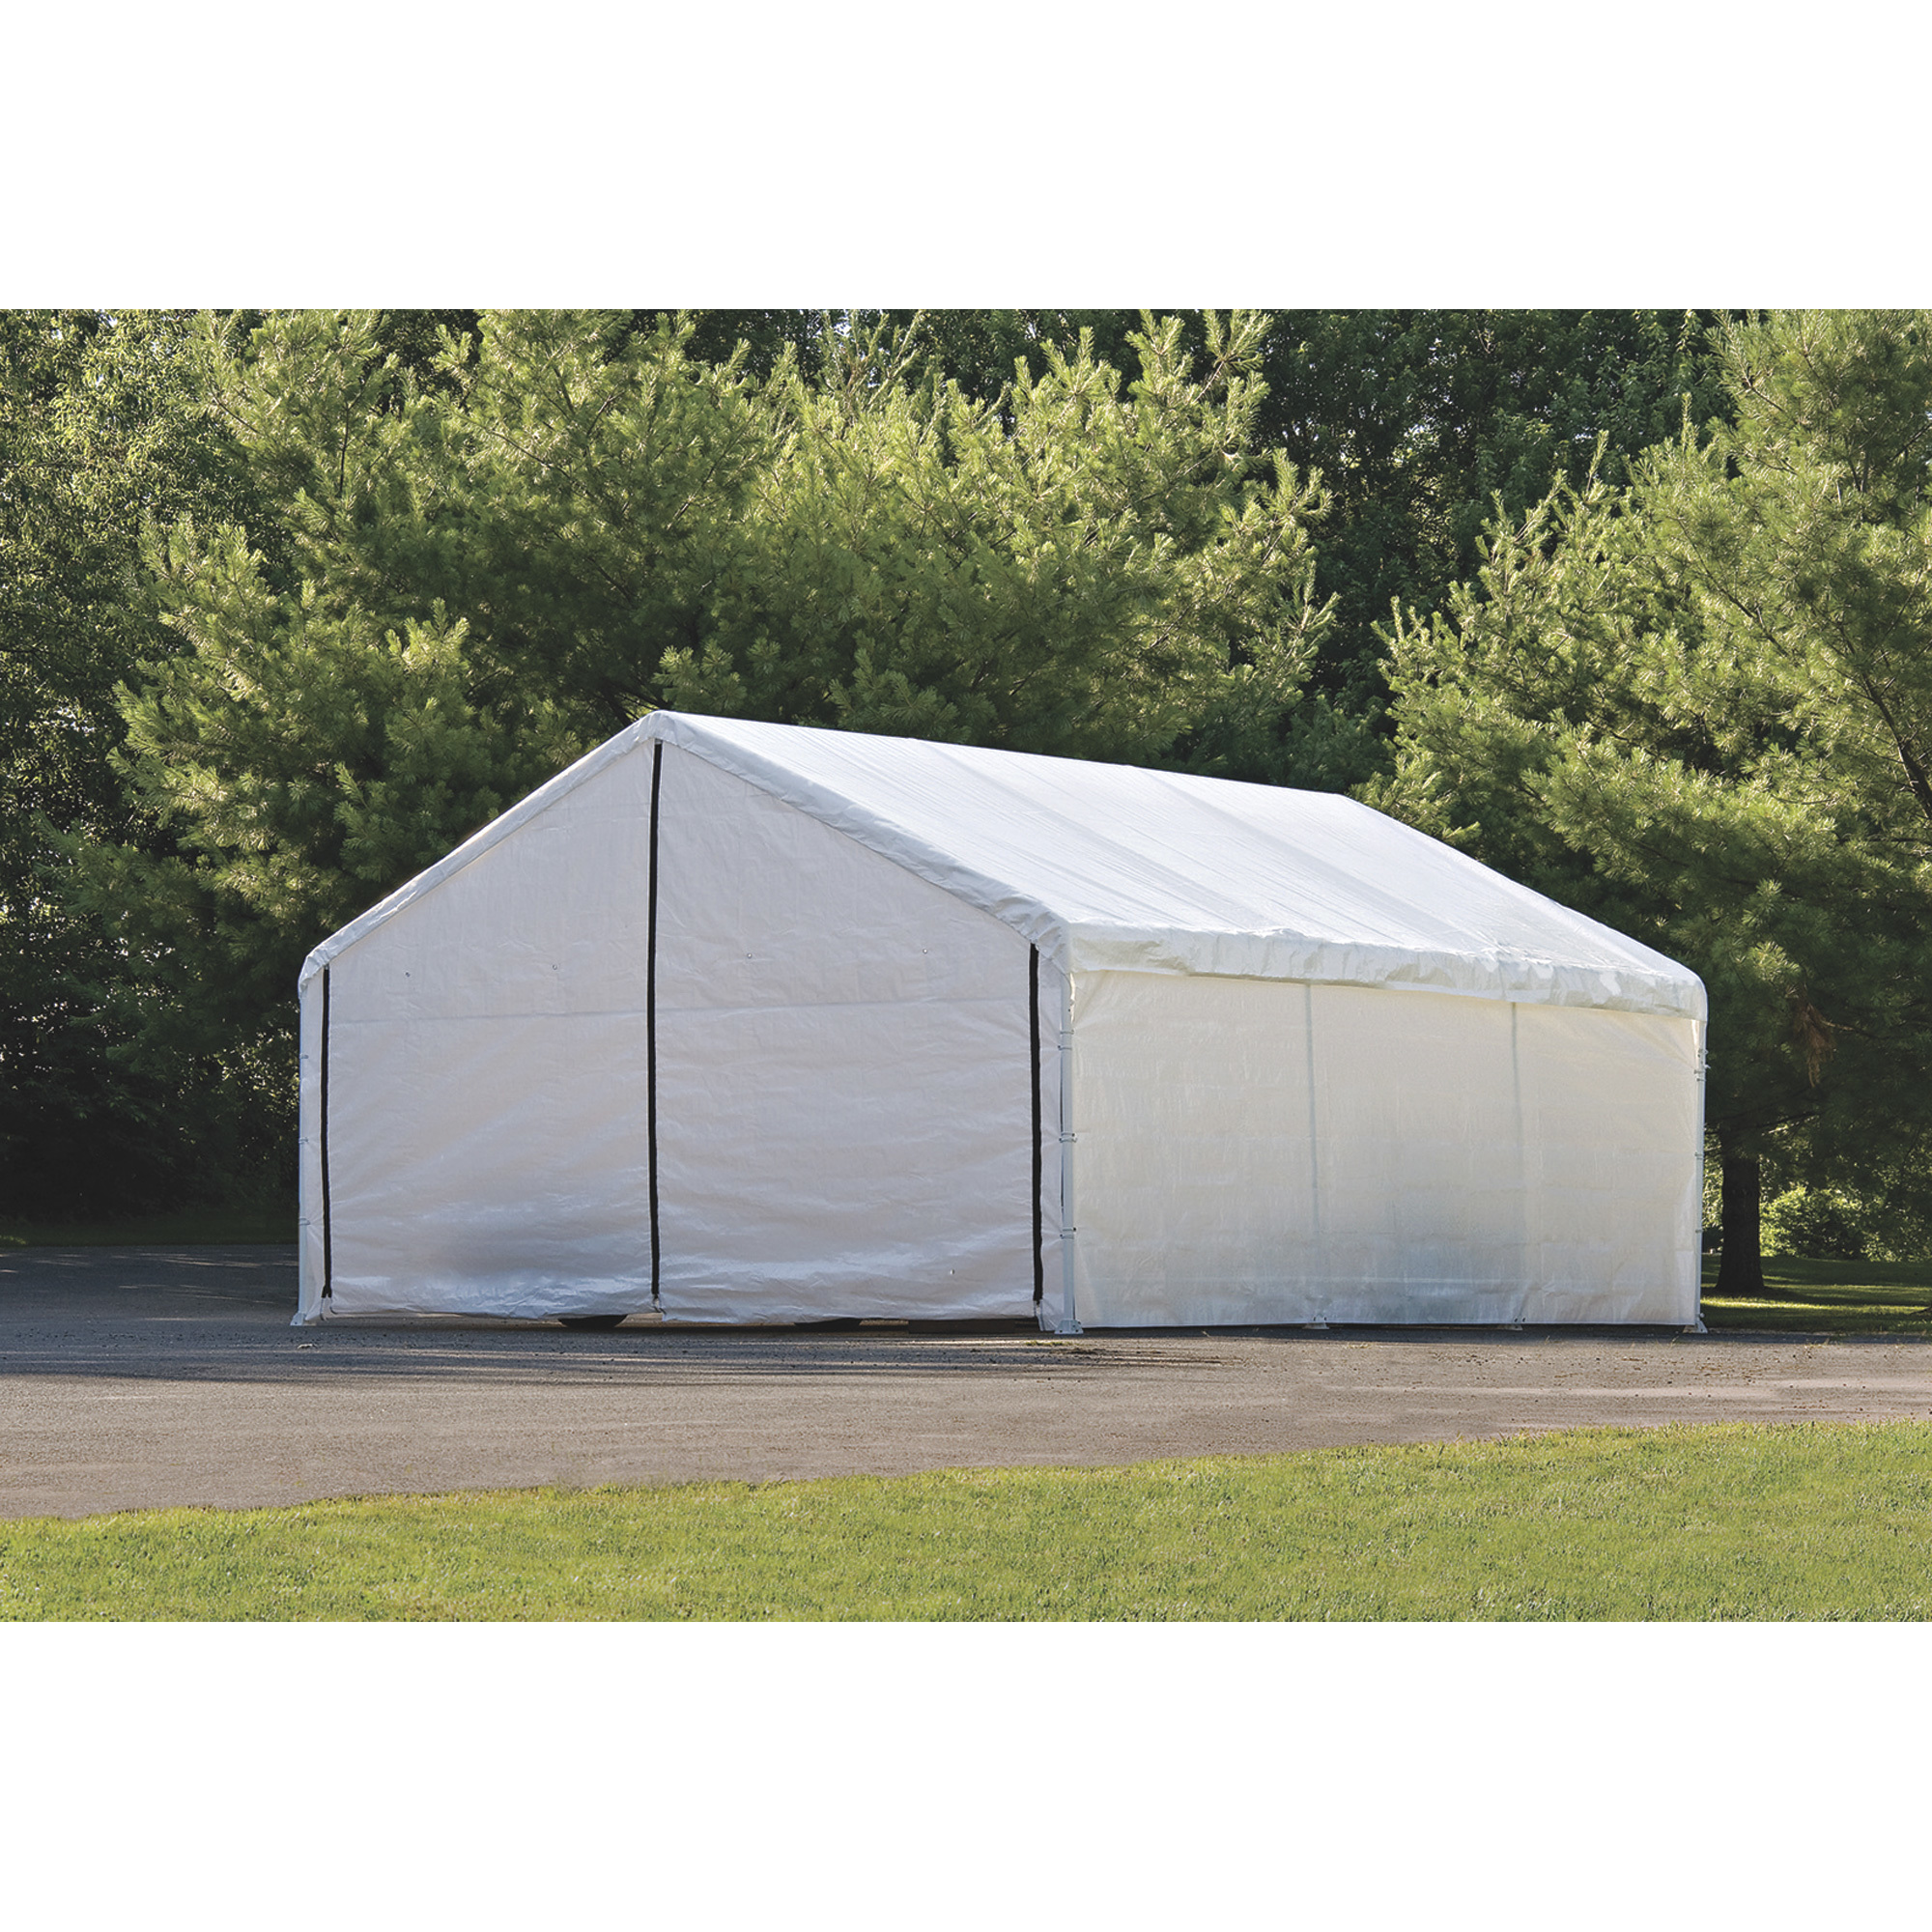 Ultra Max Outdoor Canopy Enclosure Kit — Fits Item# 252306, 30ft. x 30ft. Canopy, Model - ShelterLogic 27775